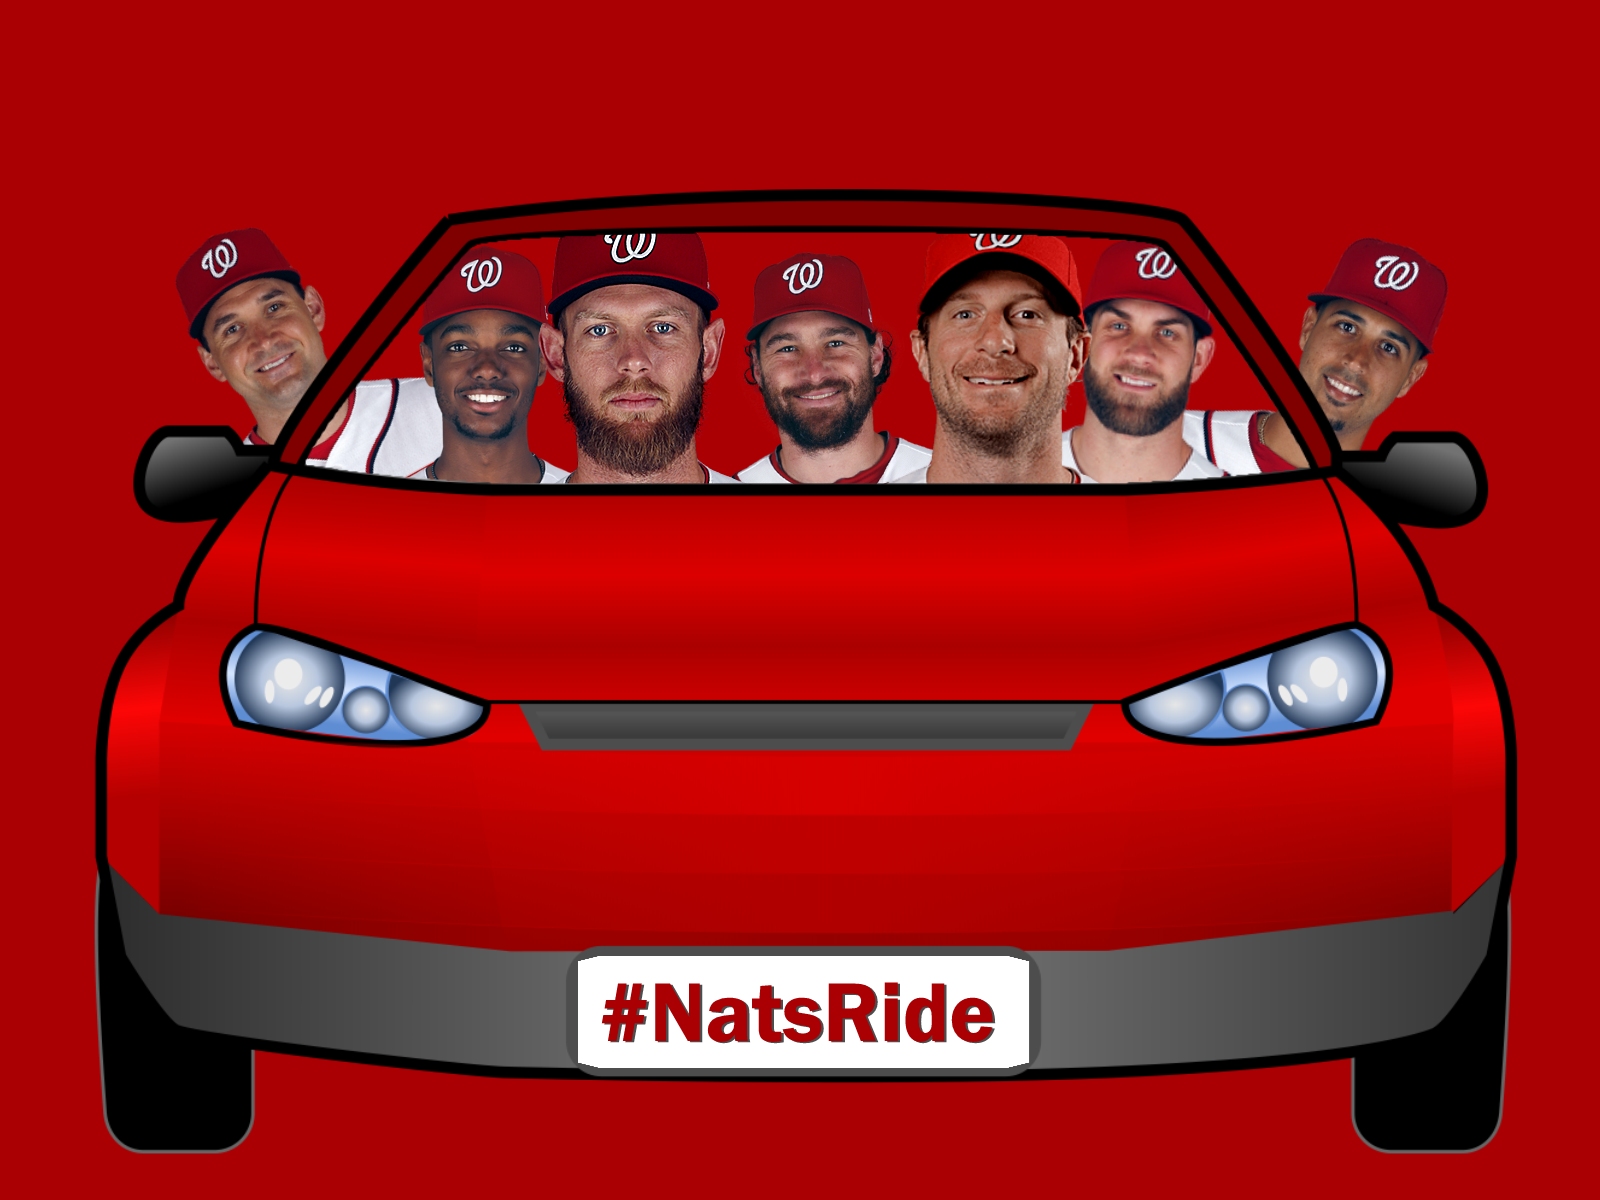 Washington Nationals Fans revive #Natsride hashtag to help each other
get home after Thursday’s late playoff game